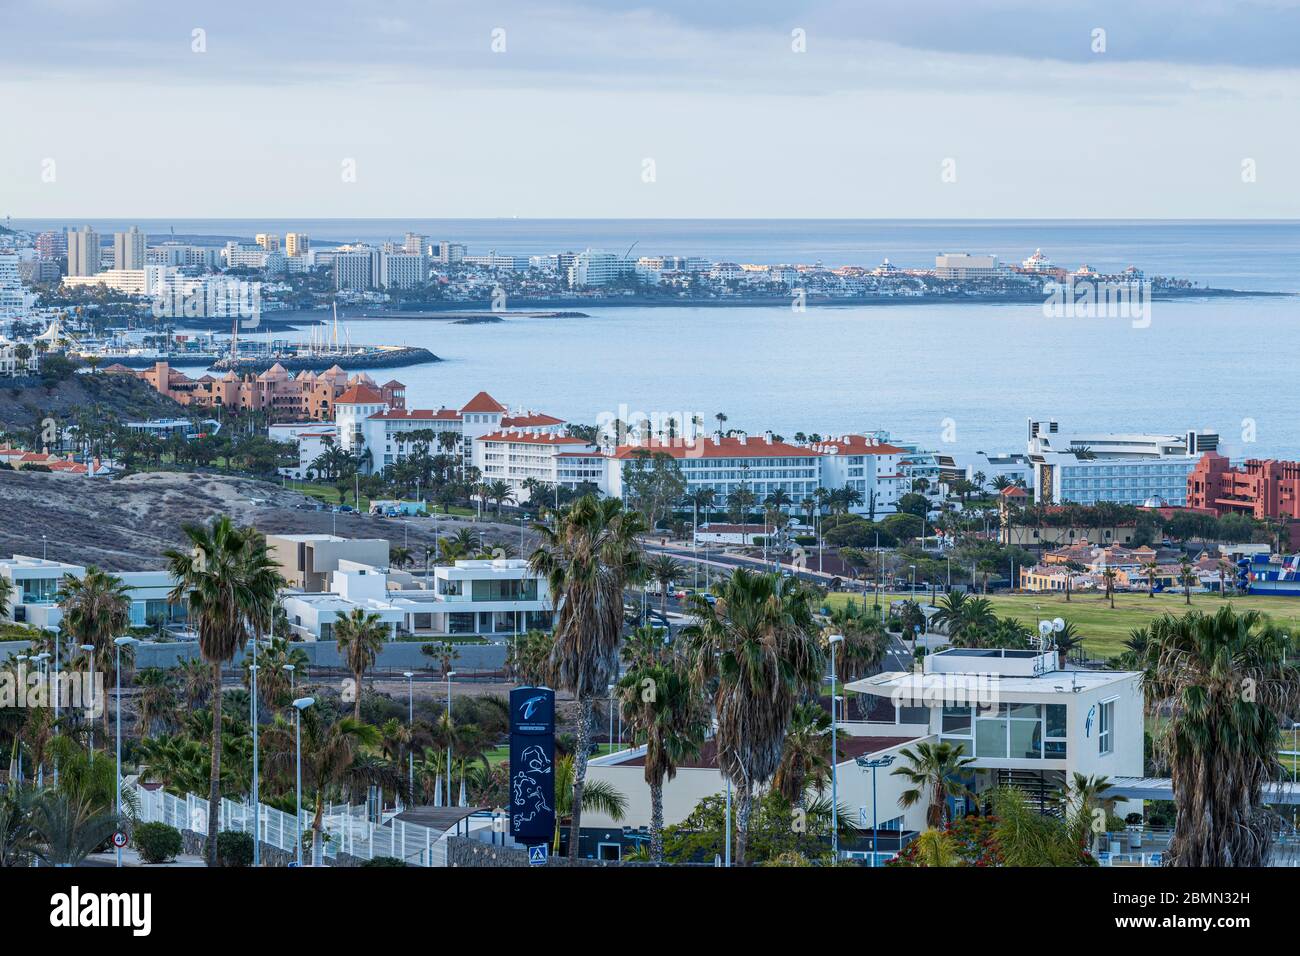 View over the coastal resorts at dawn during the covid 19 lockdown in the tourist resort area of Costa Adeje, Tenerife, Canary Islands, Spain Stock Photo